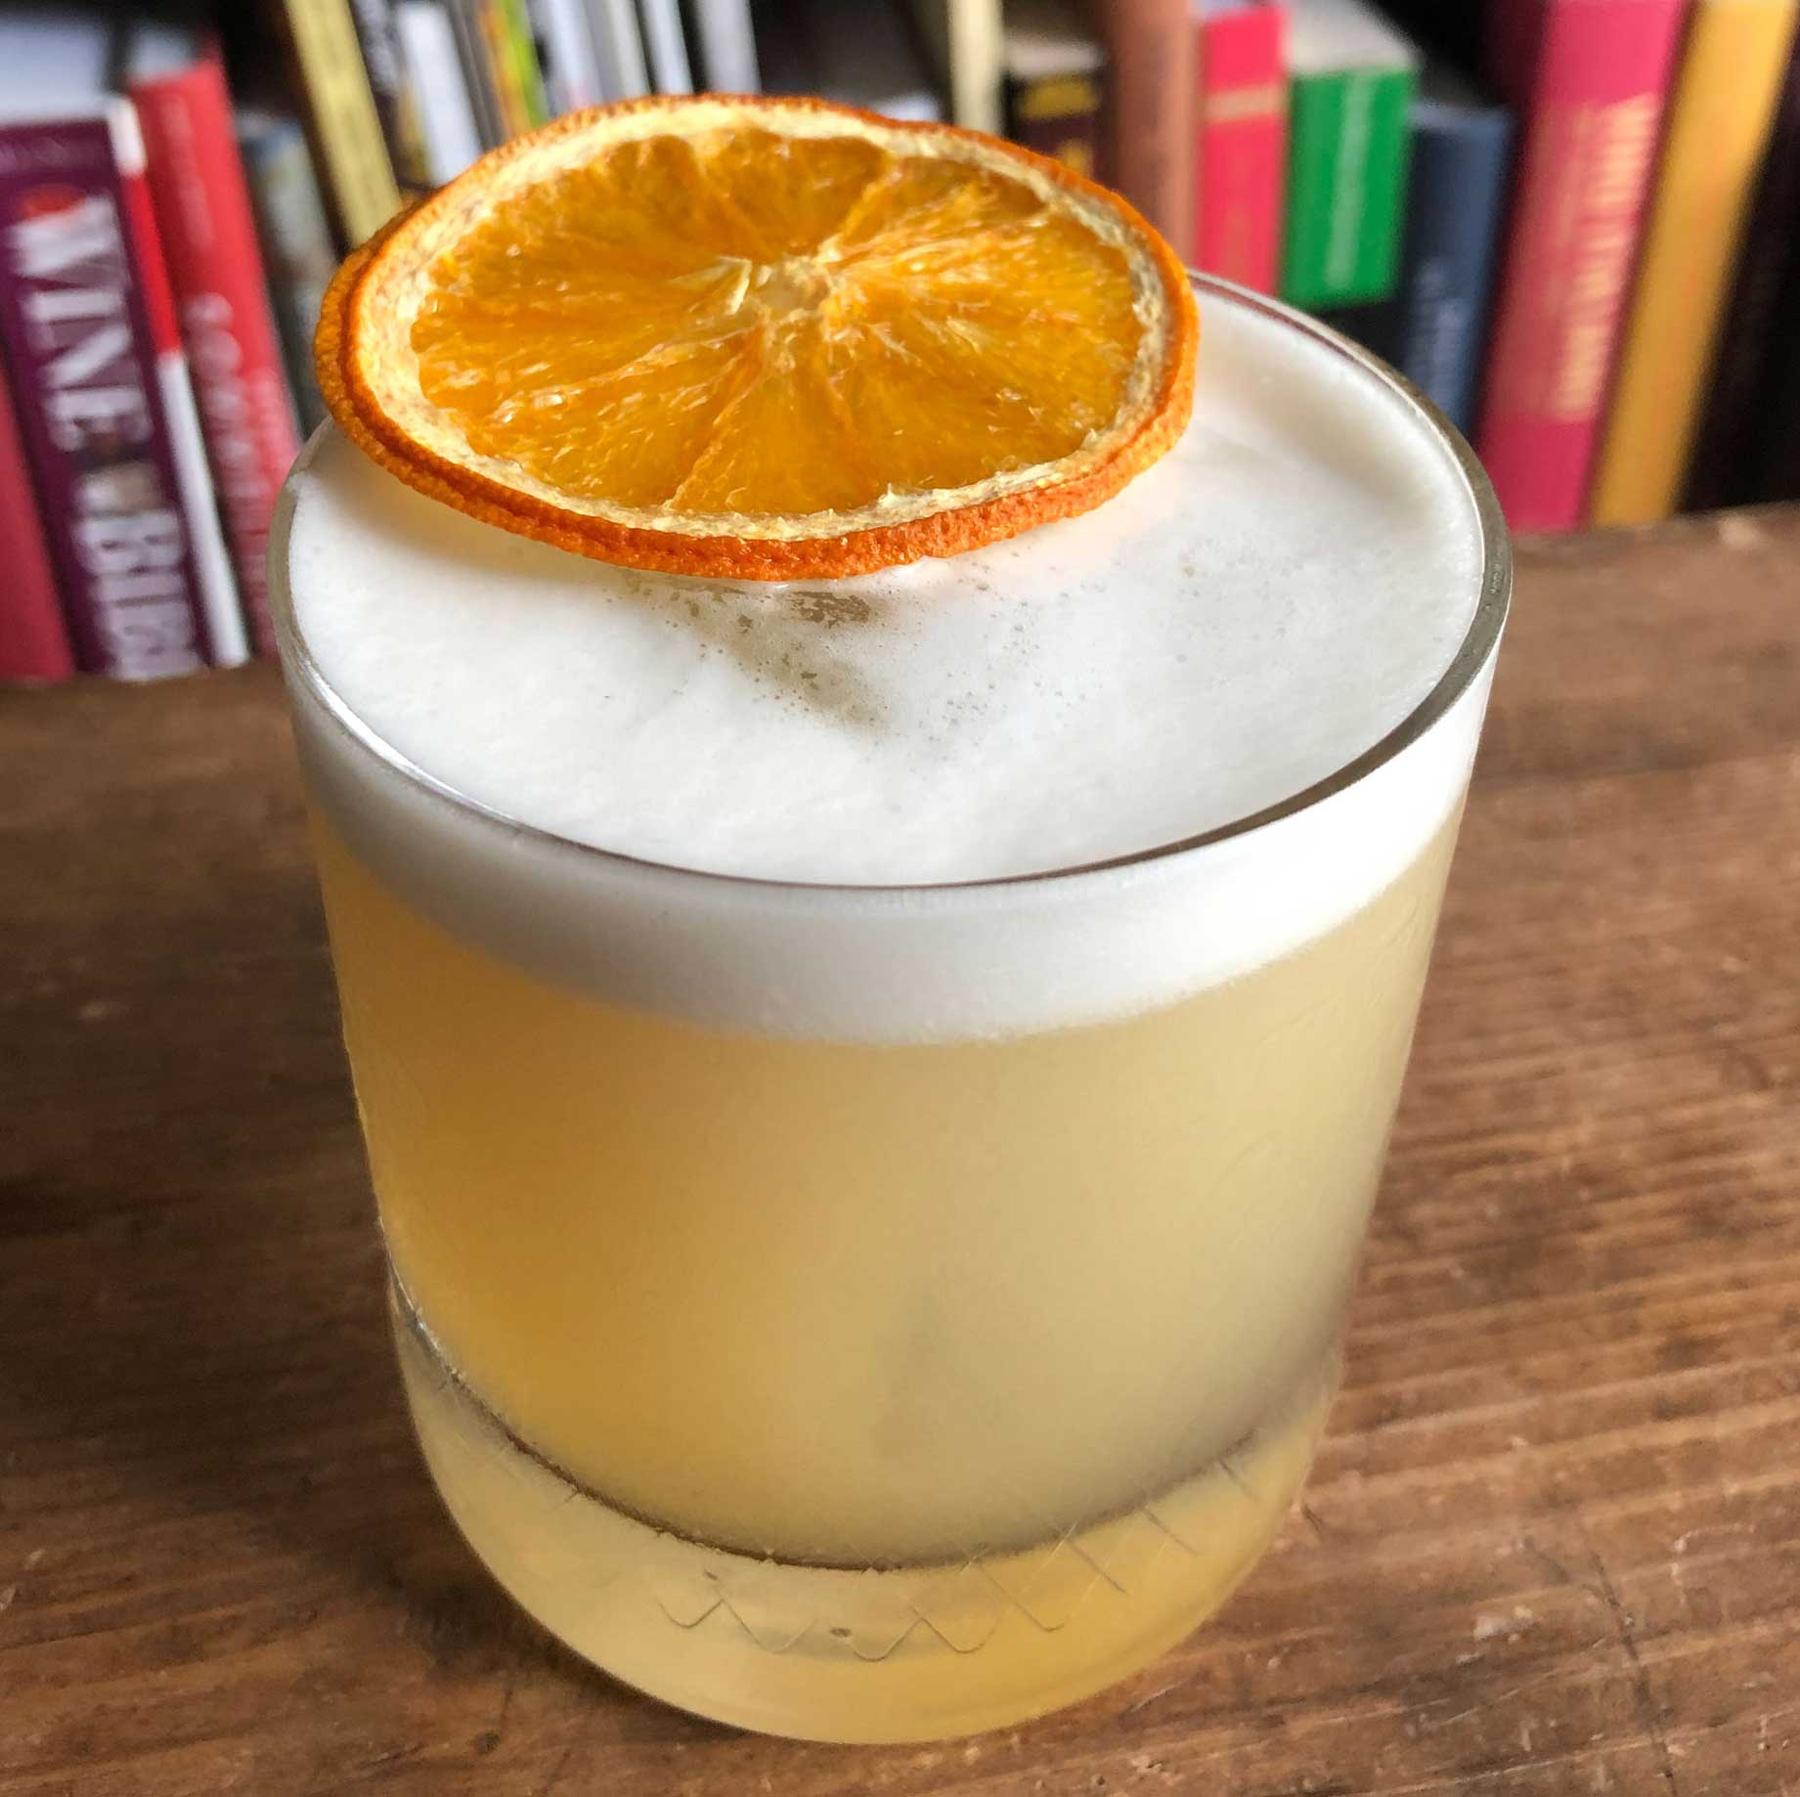 An example of the Peach Whiskey Sour, the mixed drink (drink) featuring bourbon whiskey, Rothman & Winter Orchard Peach Liqueur, egg white, lemon juice, simple syrup, and orange twist; photo by Lee Edwards